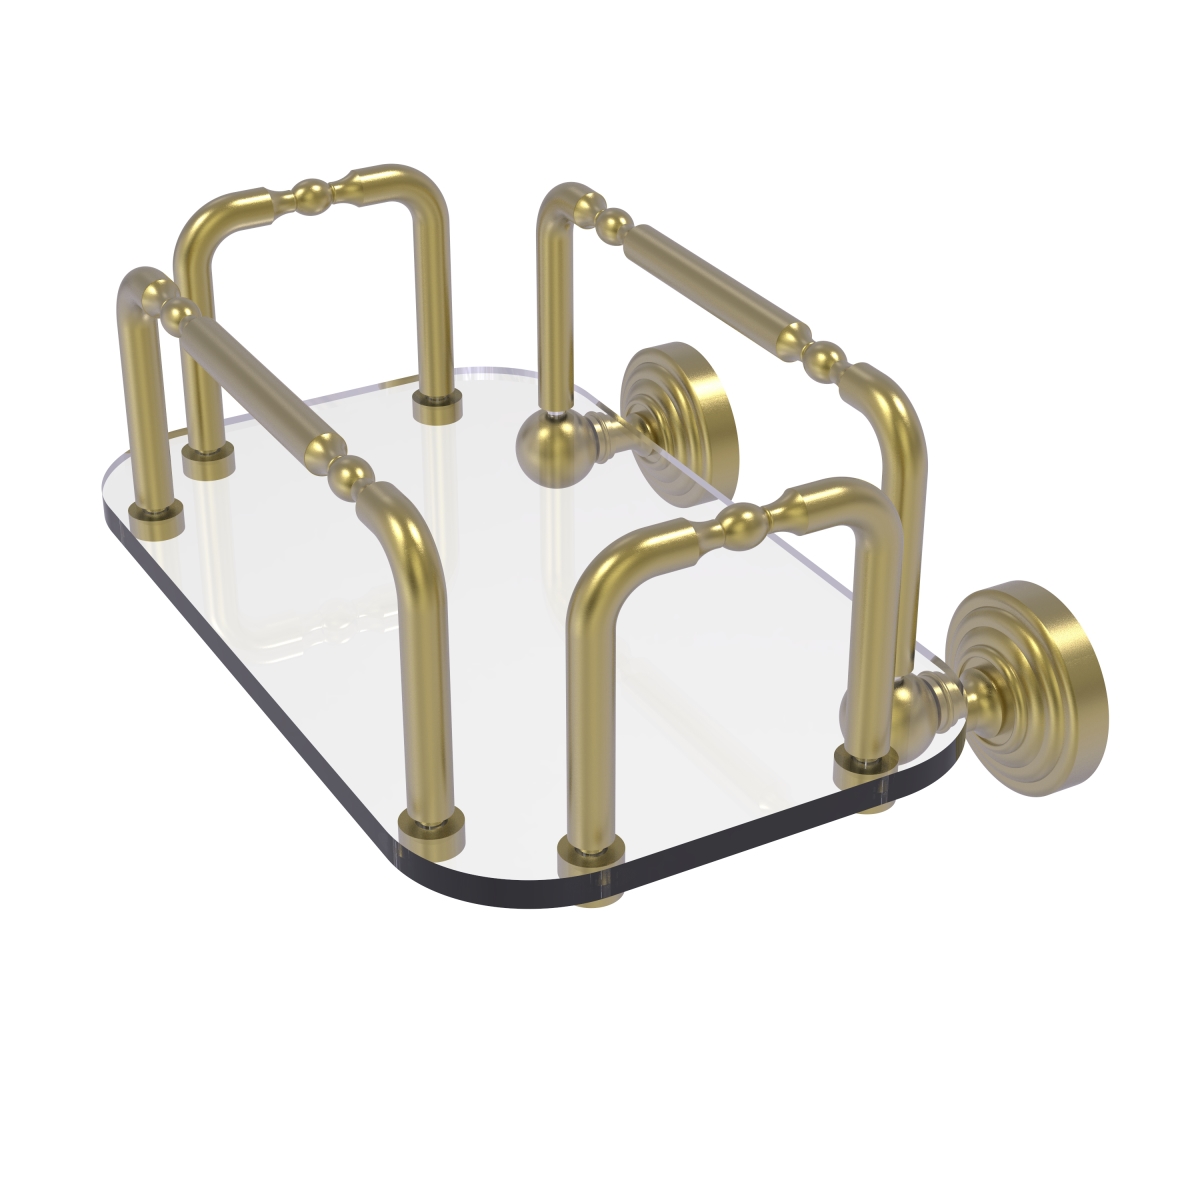 Gt-2-wp-sbr Waverly Place Wall Mounted Guest Towel Holder, Satin Brass